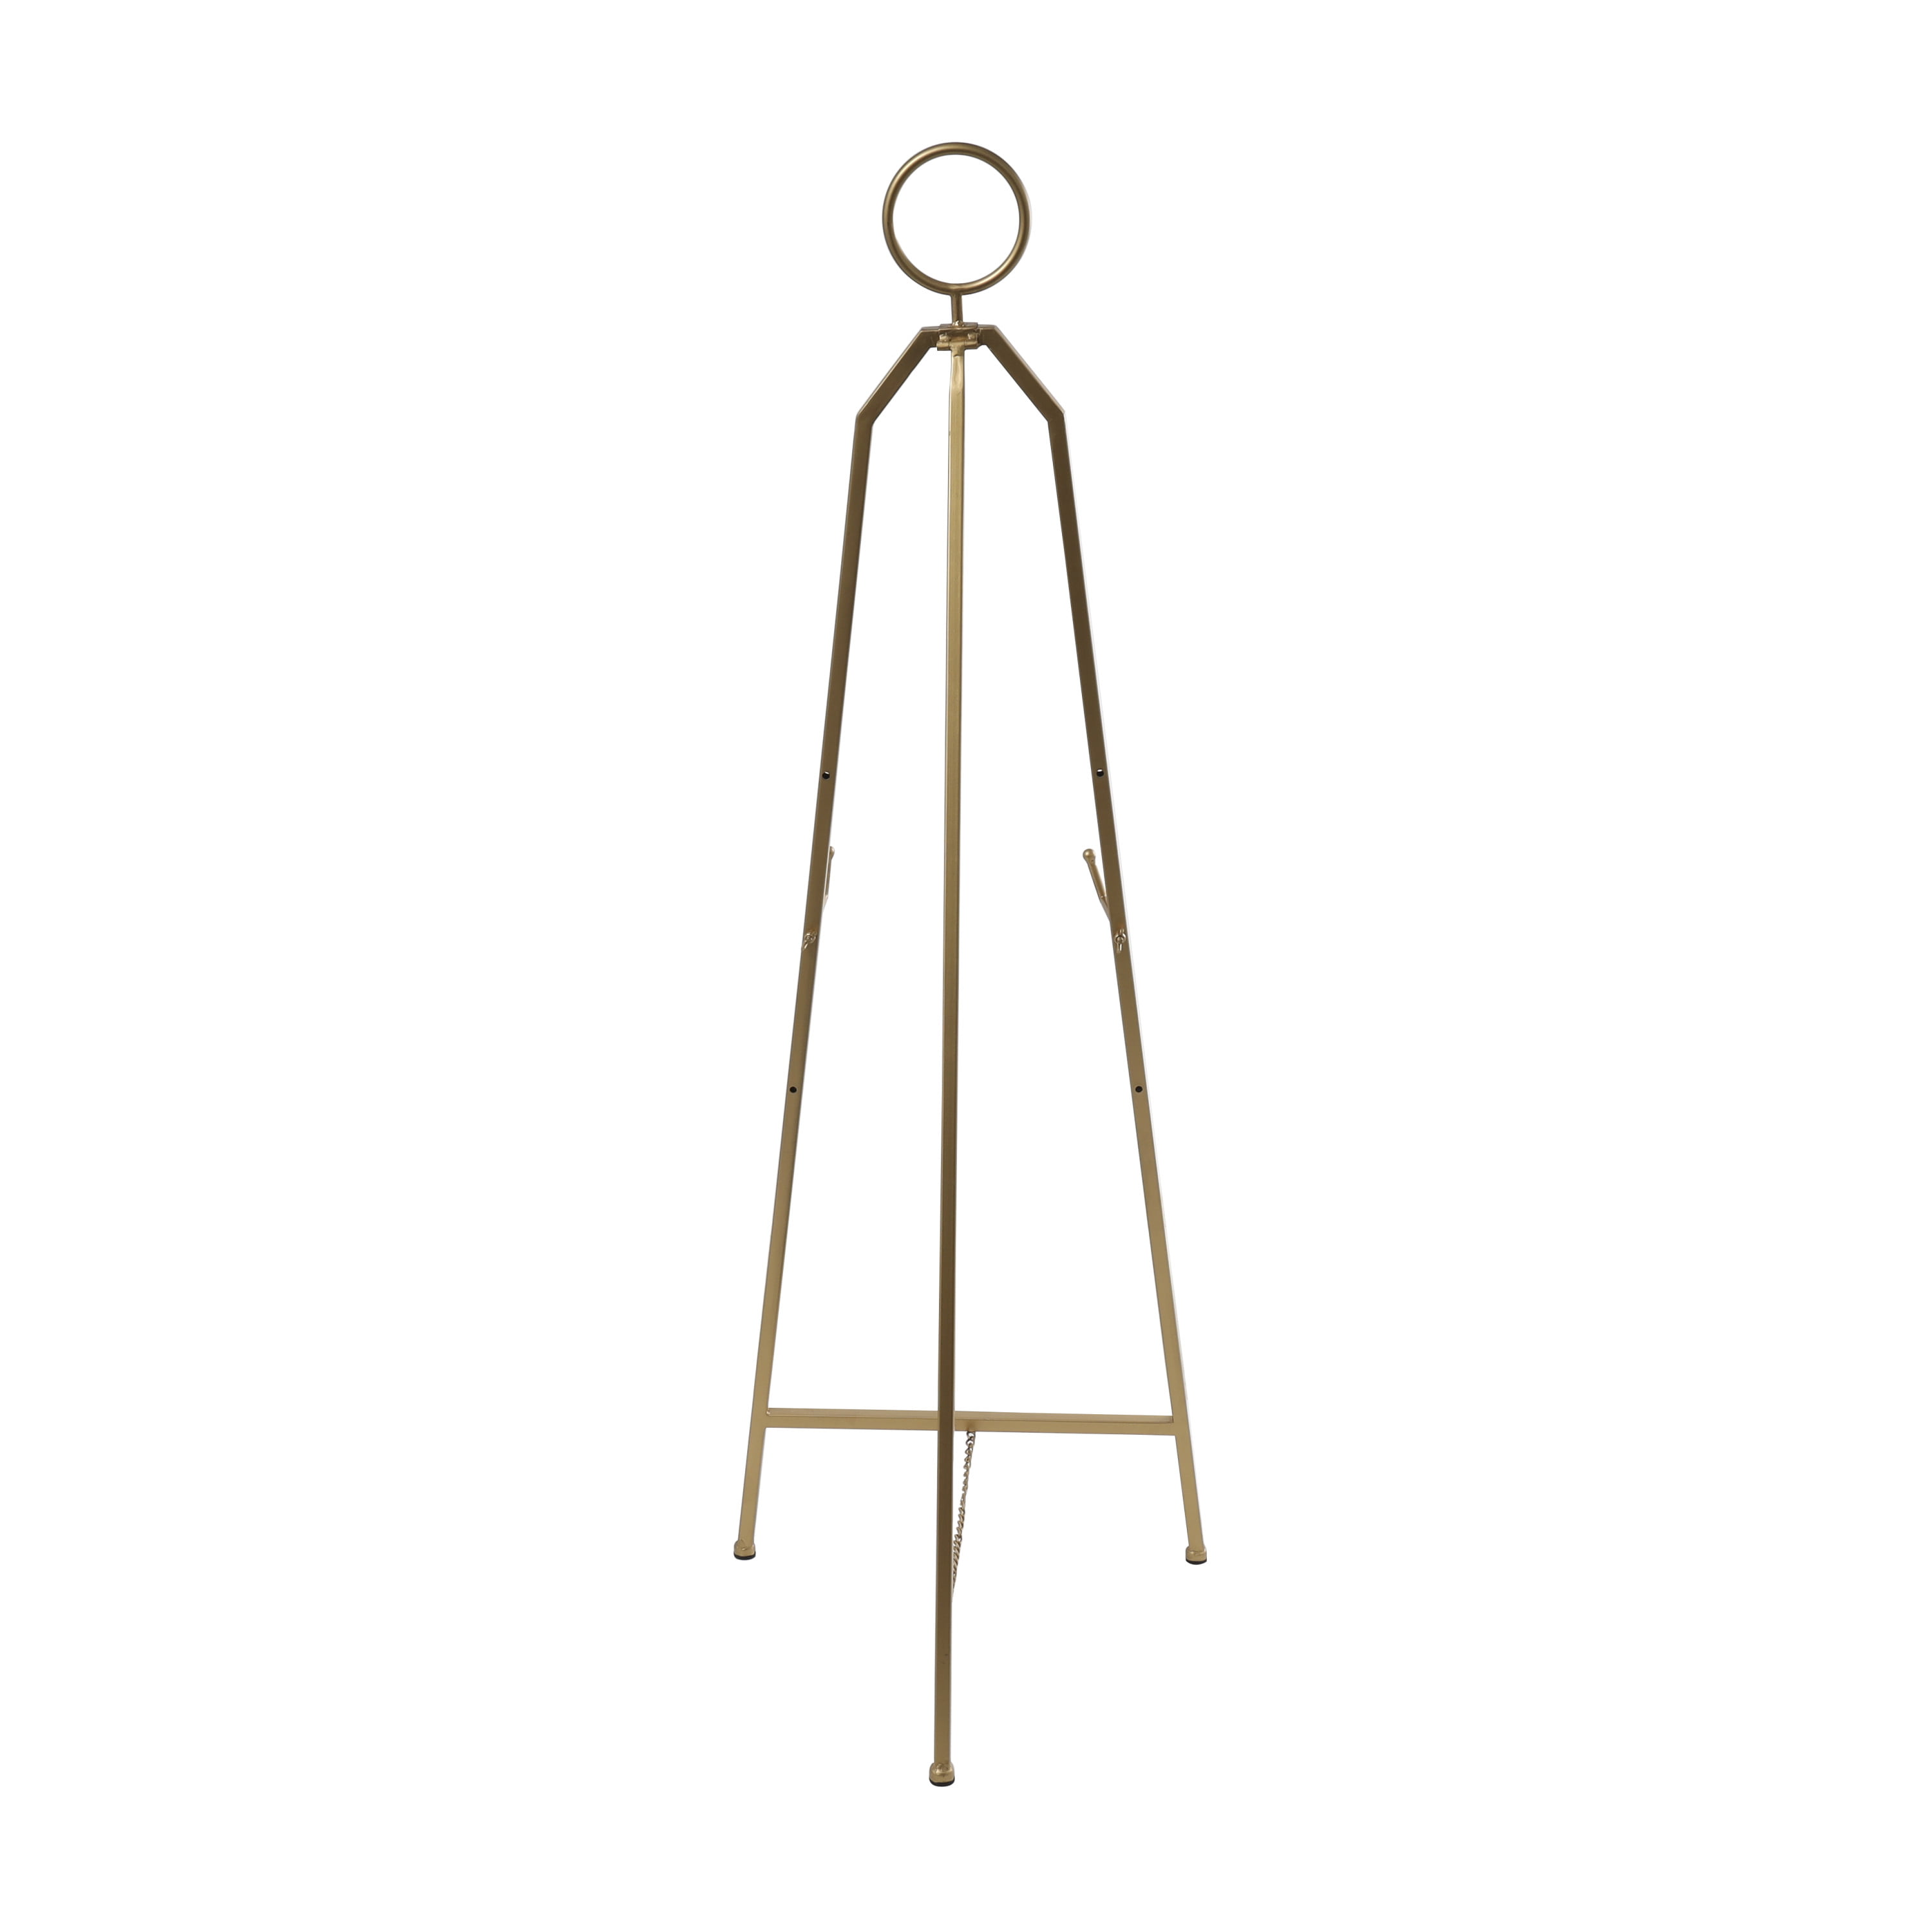 Decmode 48 in. Iron Gold Scrolled Heart Easel